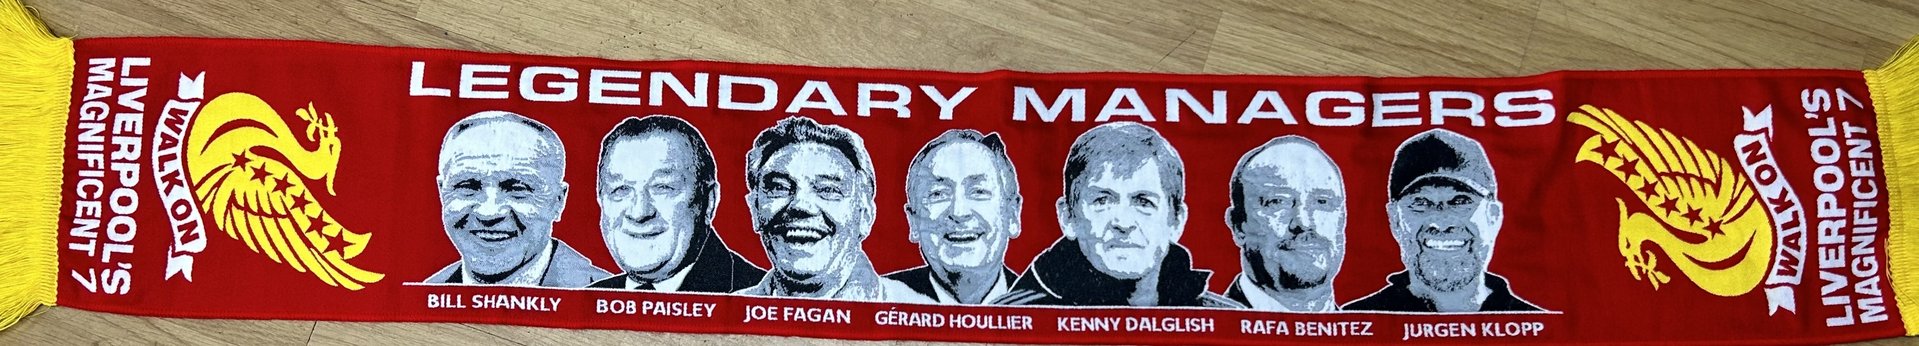 Legendary managers scarf